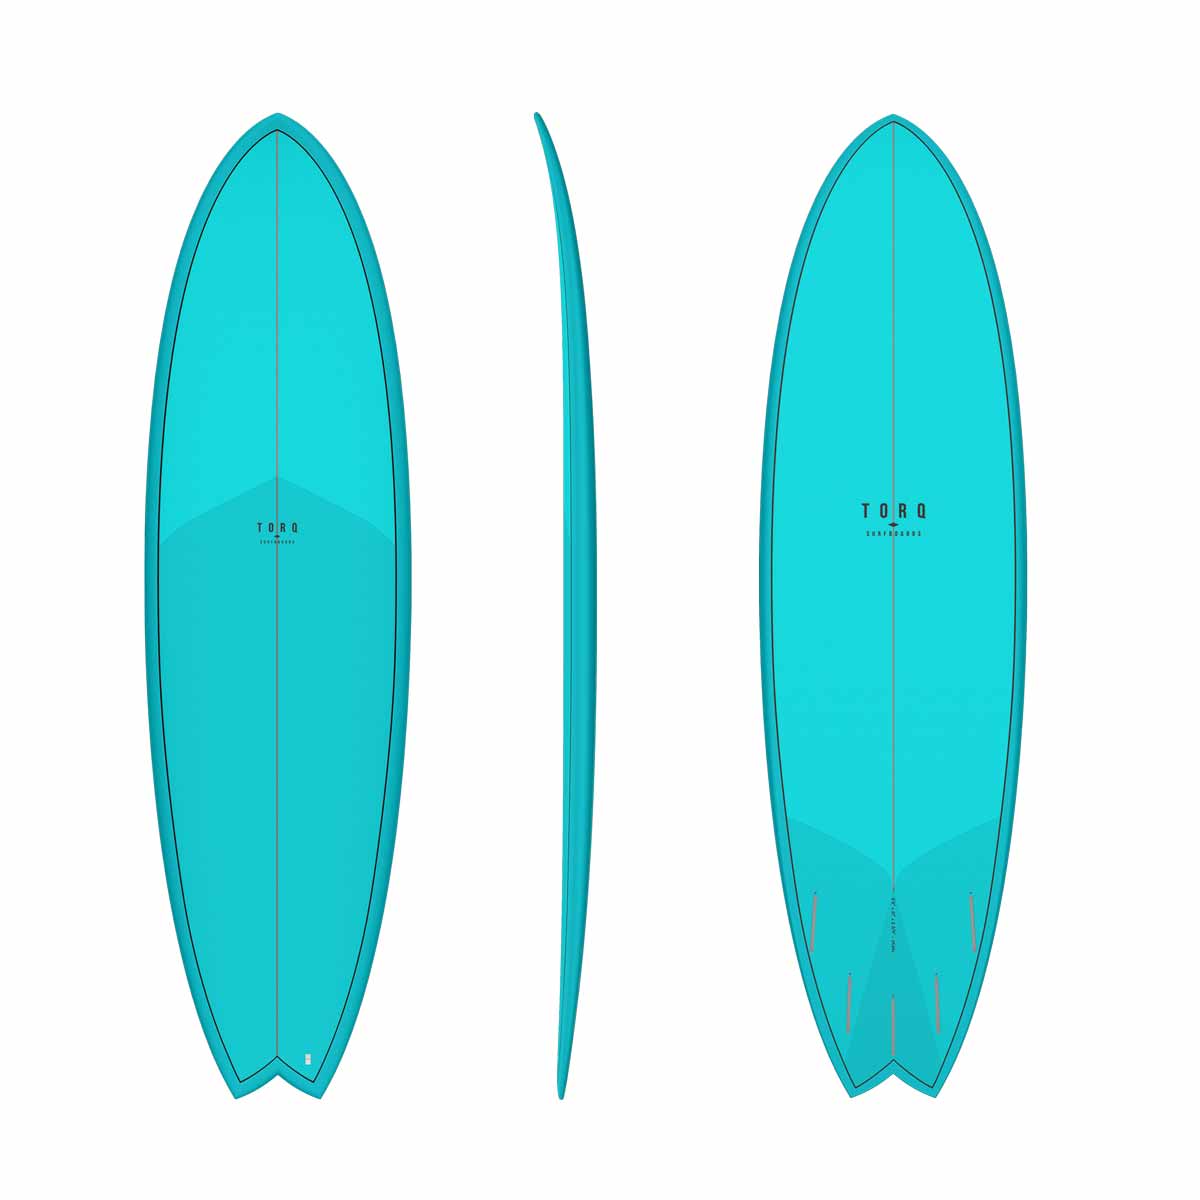 Surfboard Torq Epoxy Mod Fish Classic Color – 5'11 to 7'2